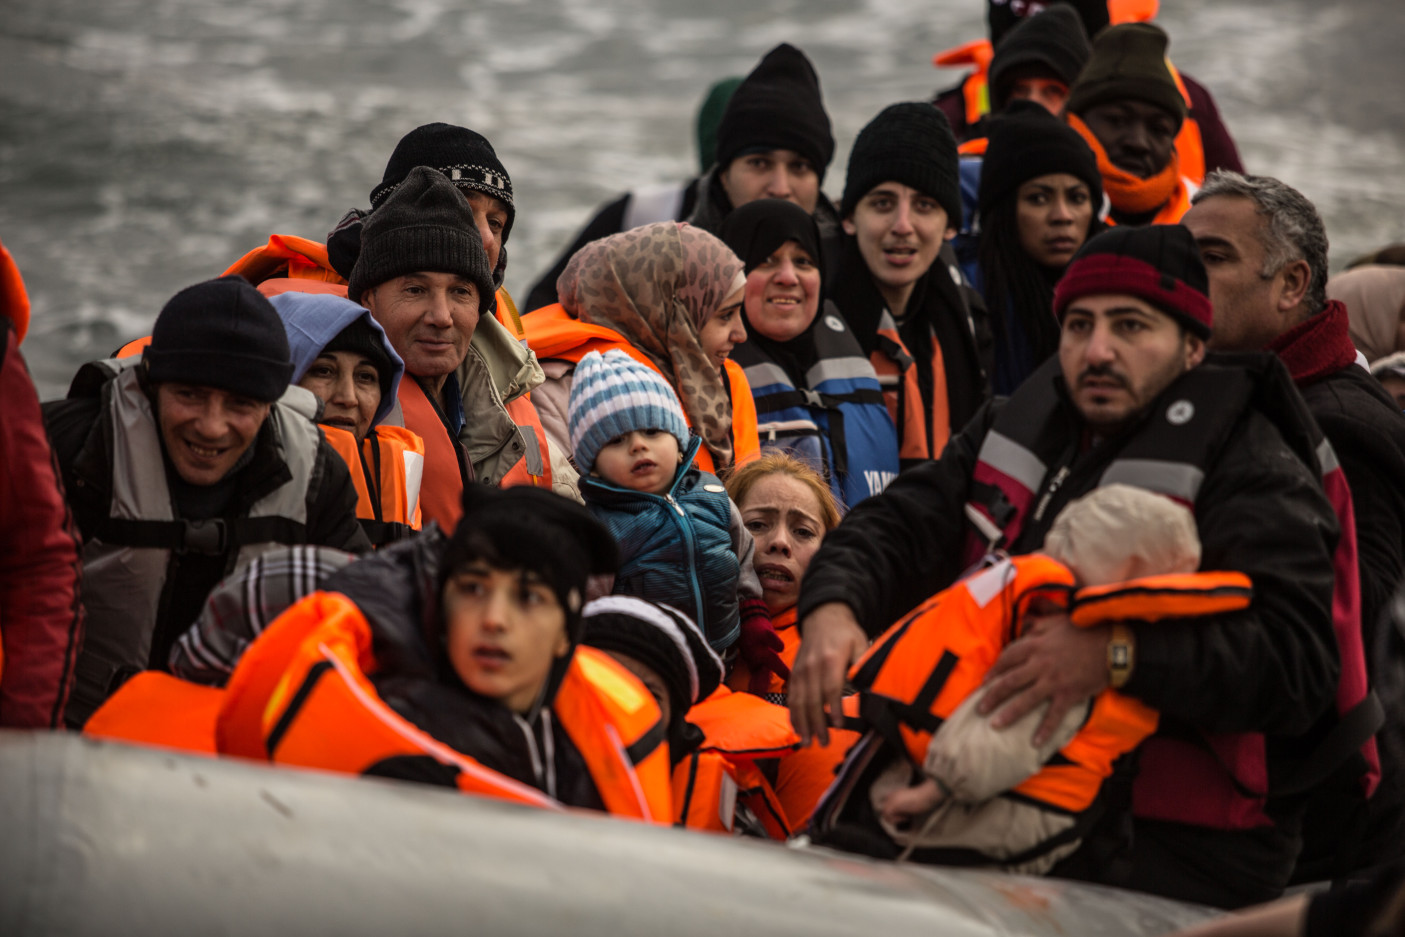 Greece. Boatload of refugees wait to disembark boat.